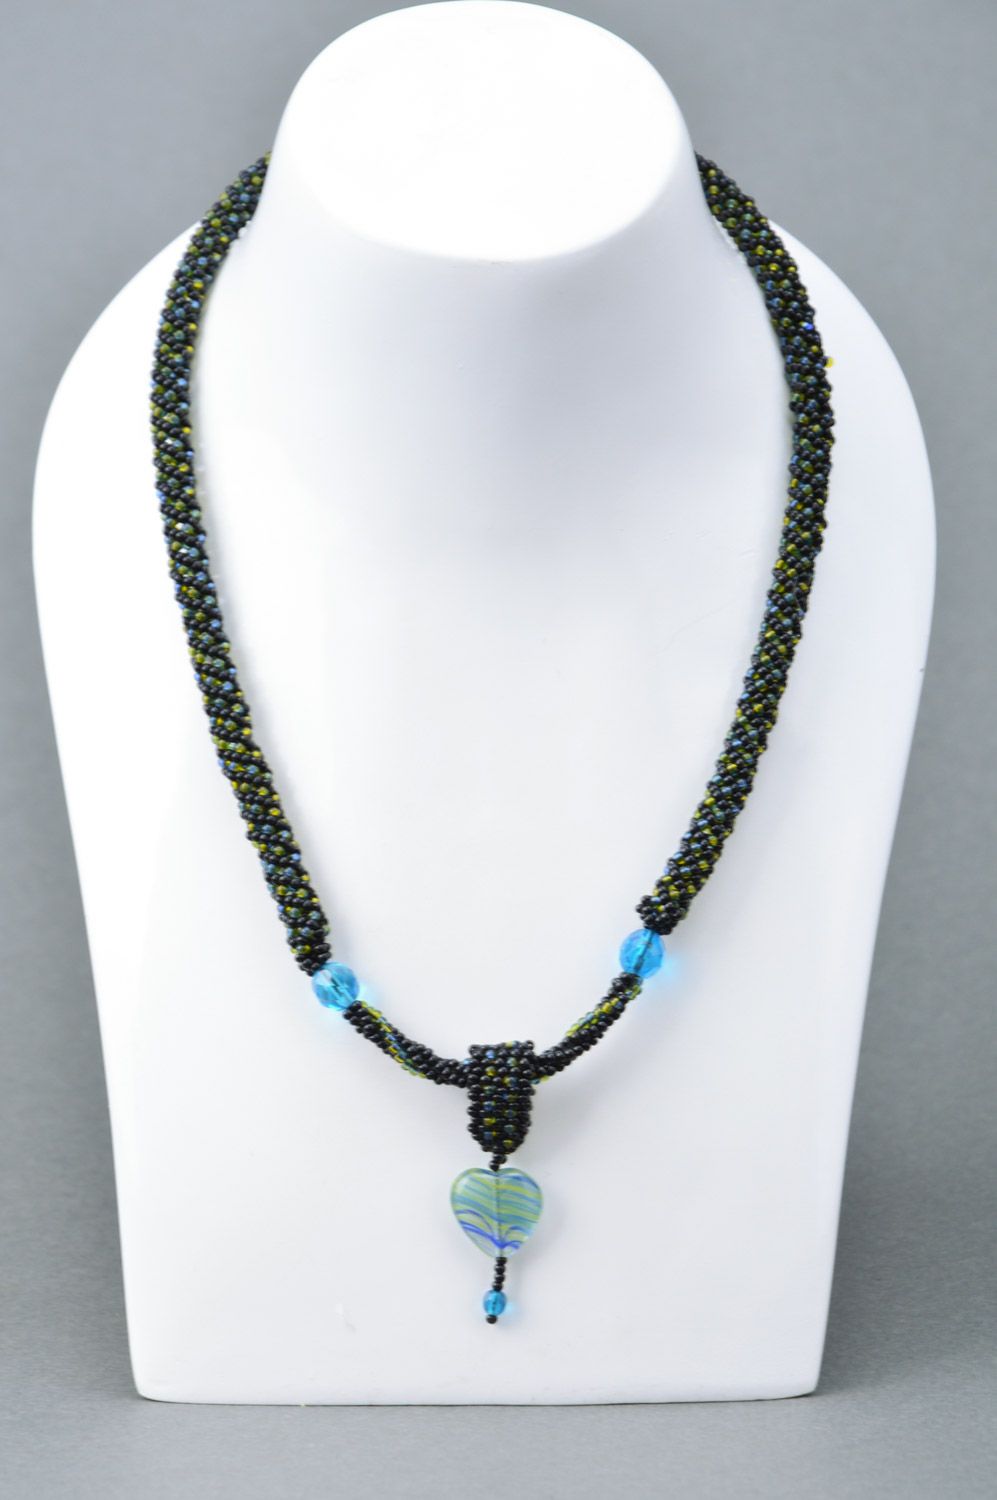 Black handmade beaded cord necklace with heart-shaped pendant photo 1